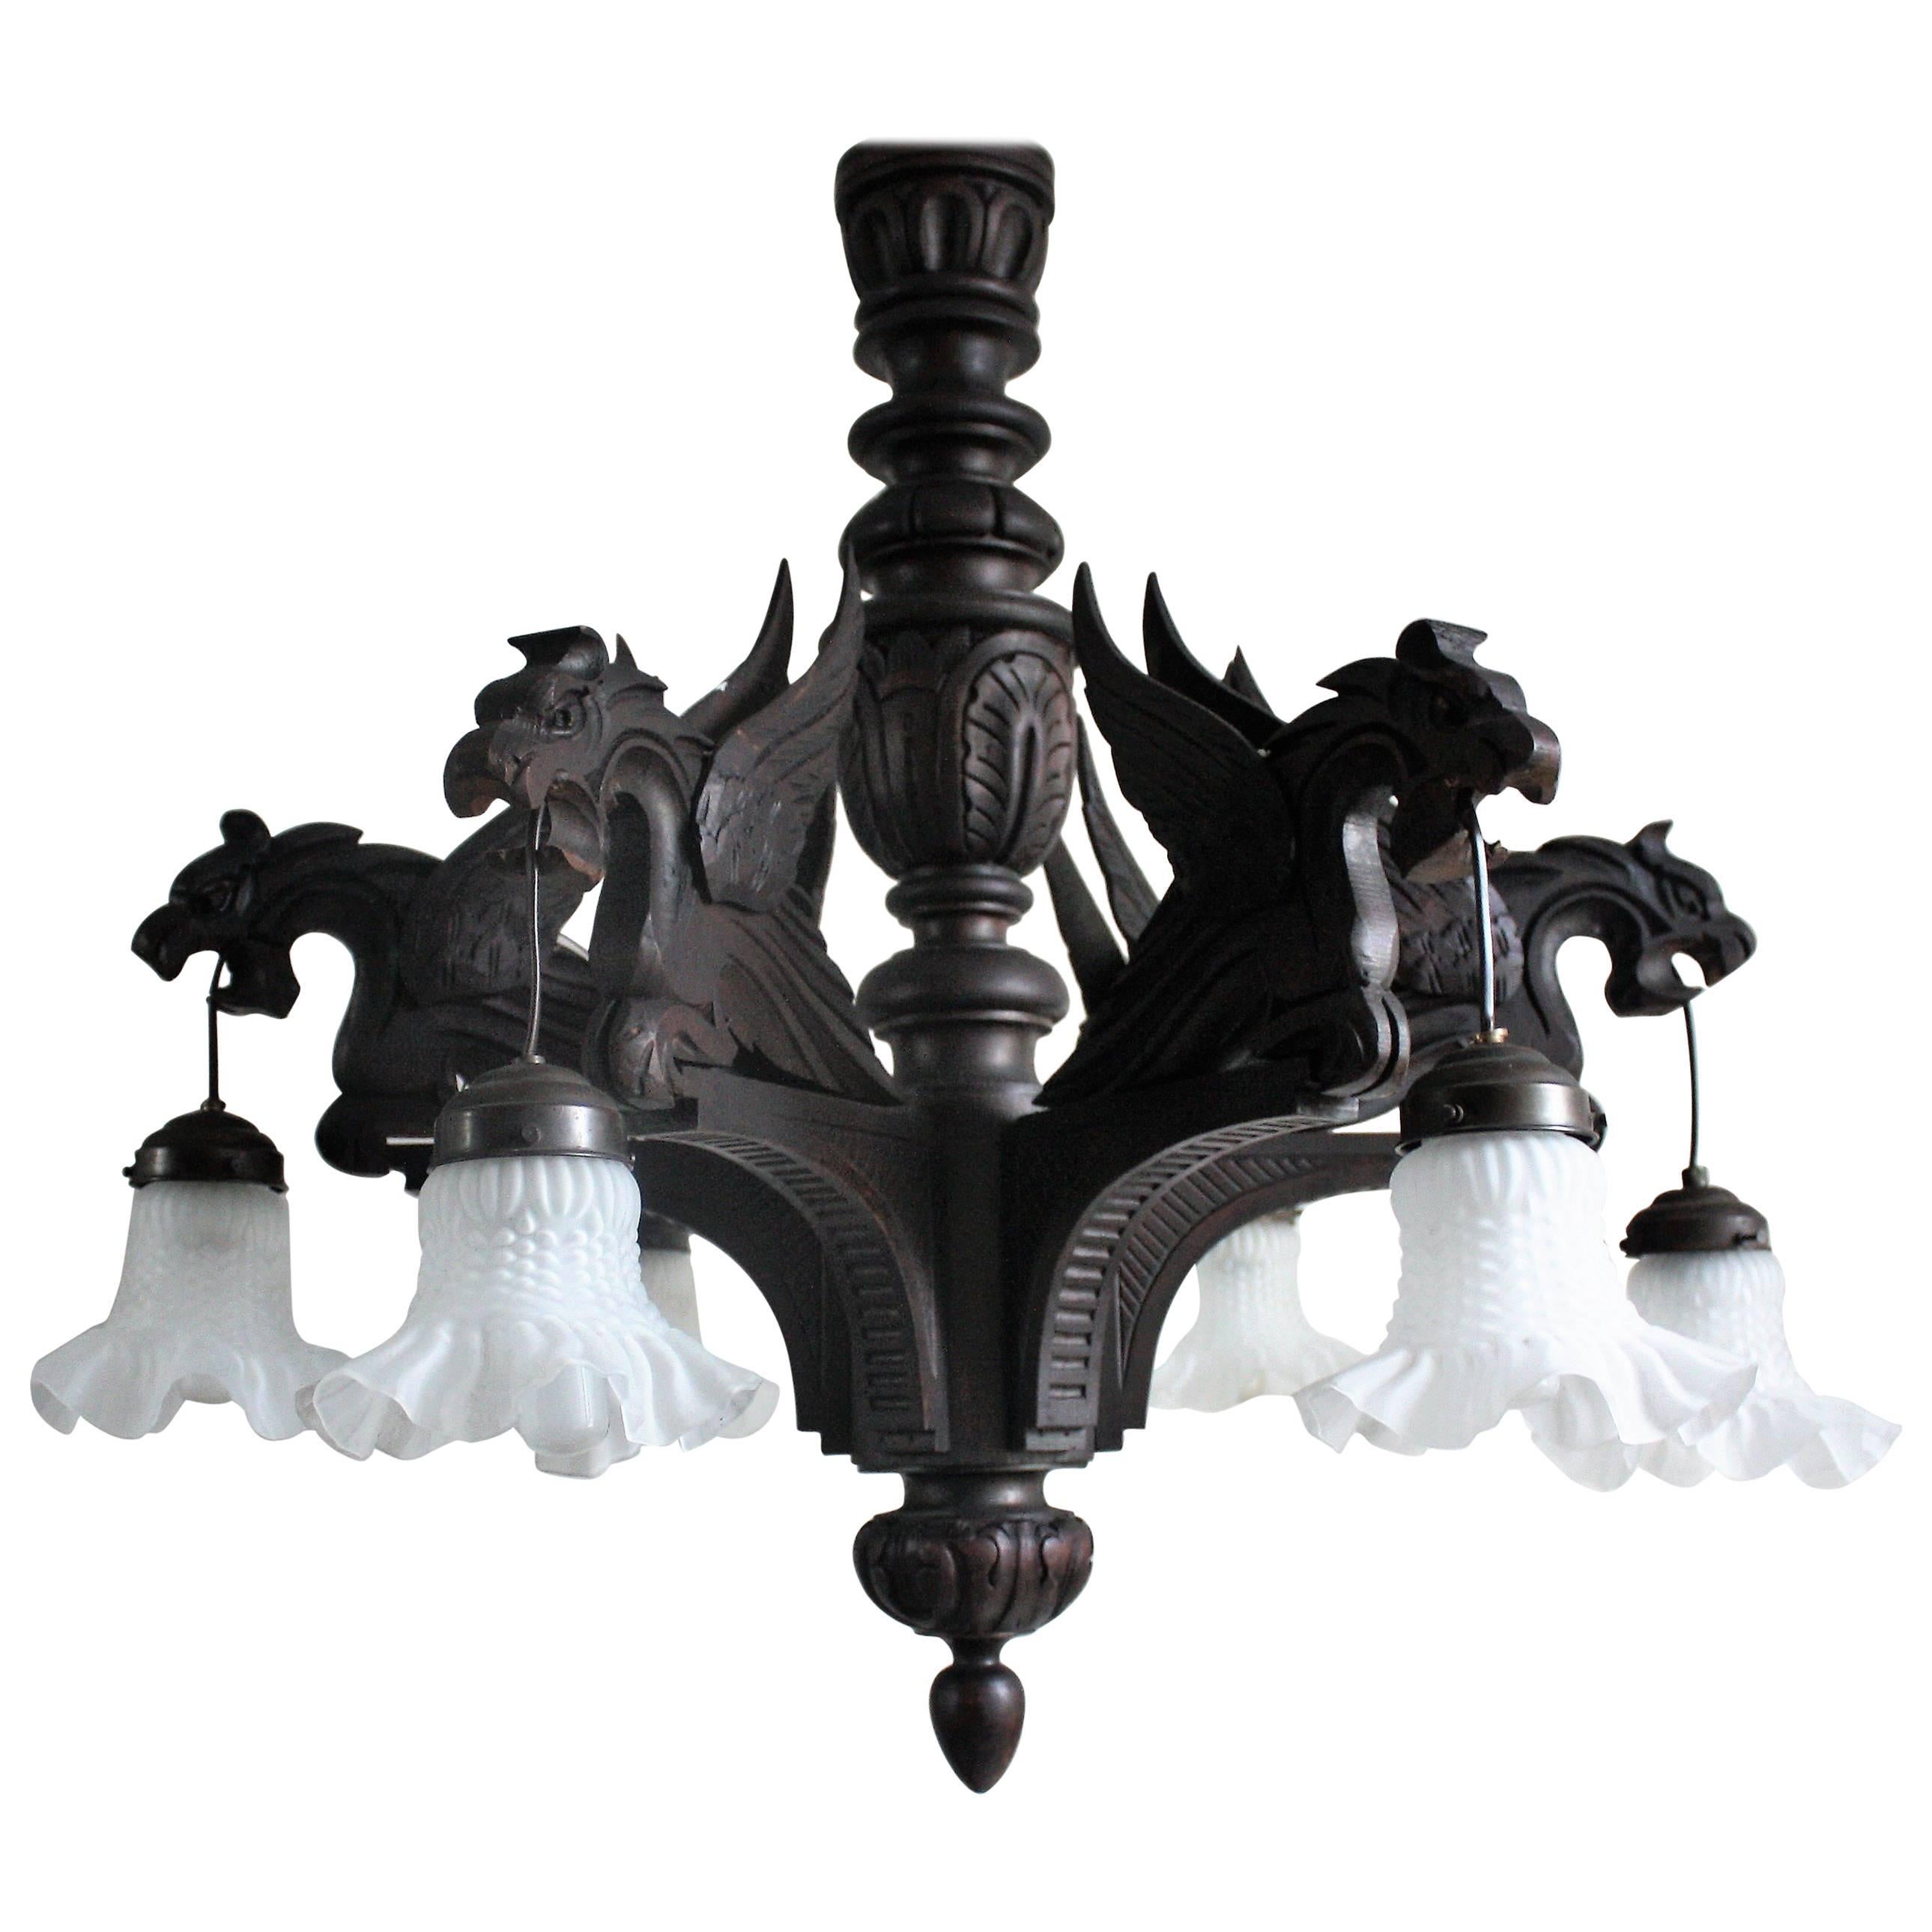 Stunning Six-Light Wooden Chandelier, Hand-Carved, circa 1900 Gothik Style